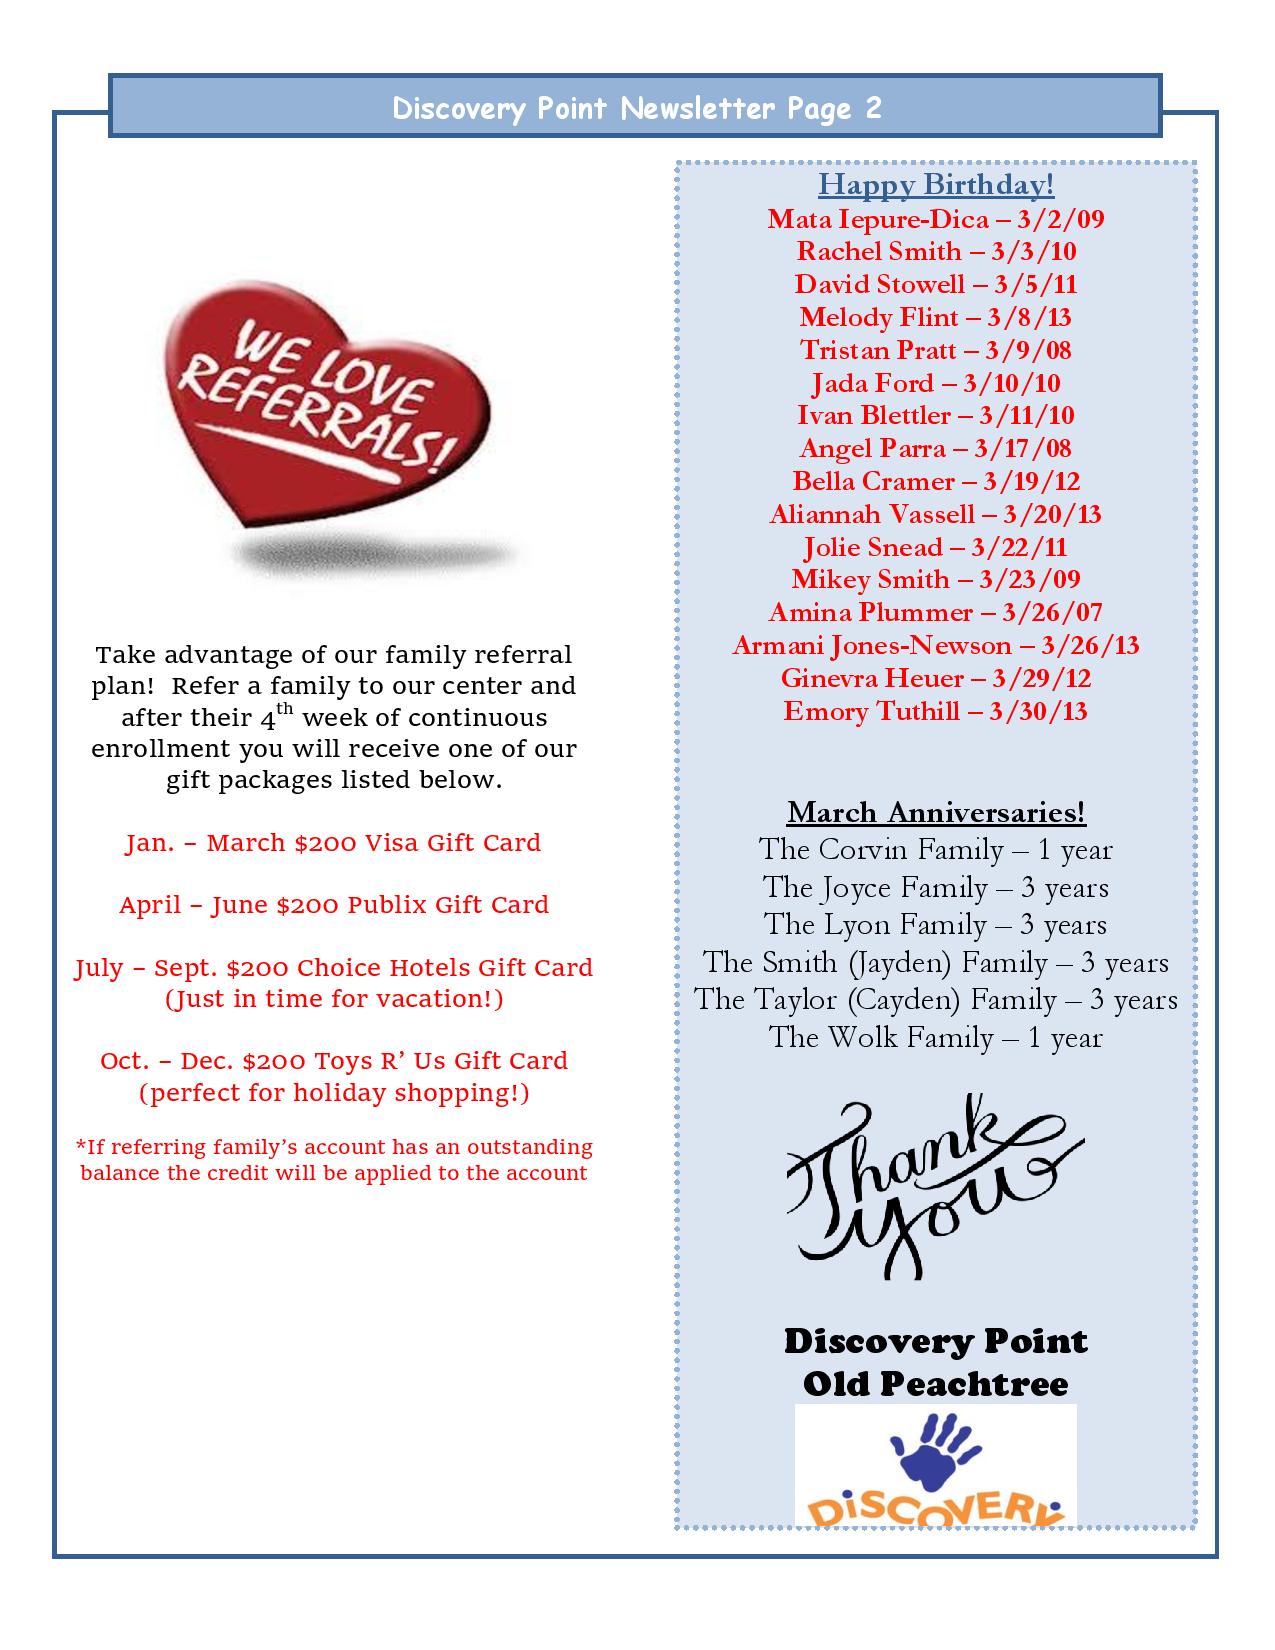 Discovery Point Old Peachtree March 2015 Newsletter Page 2